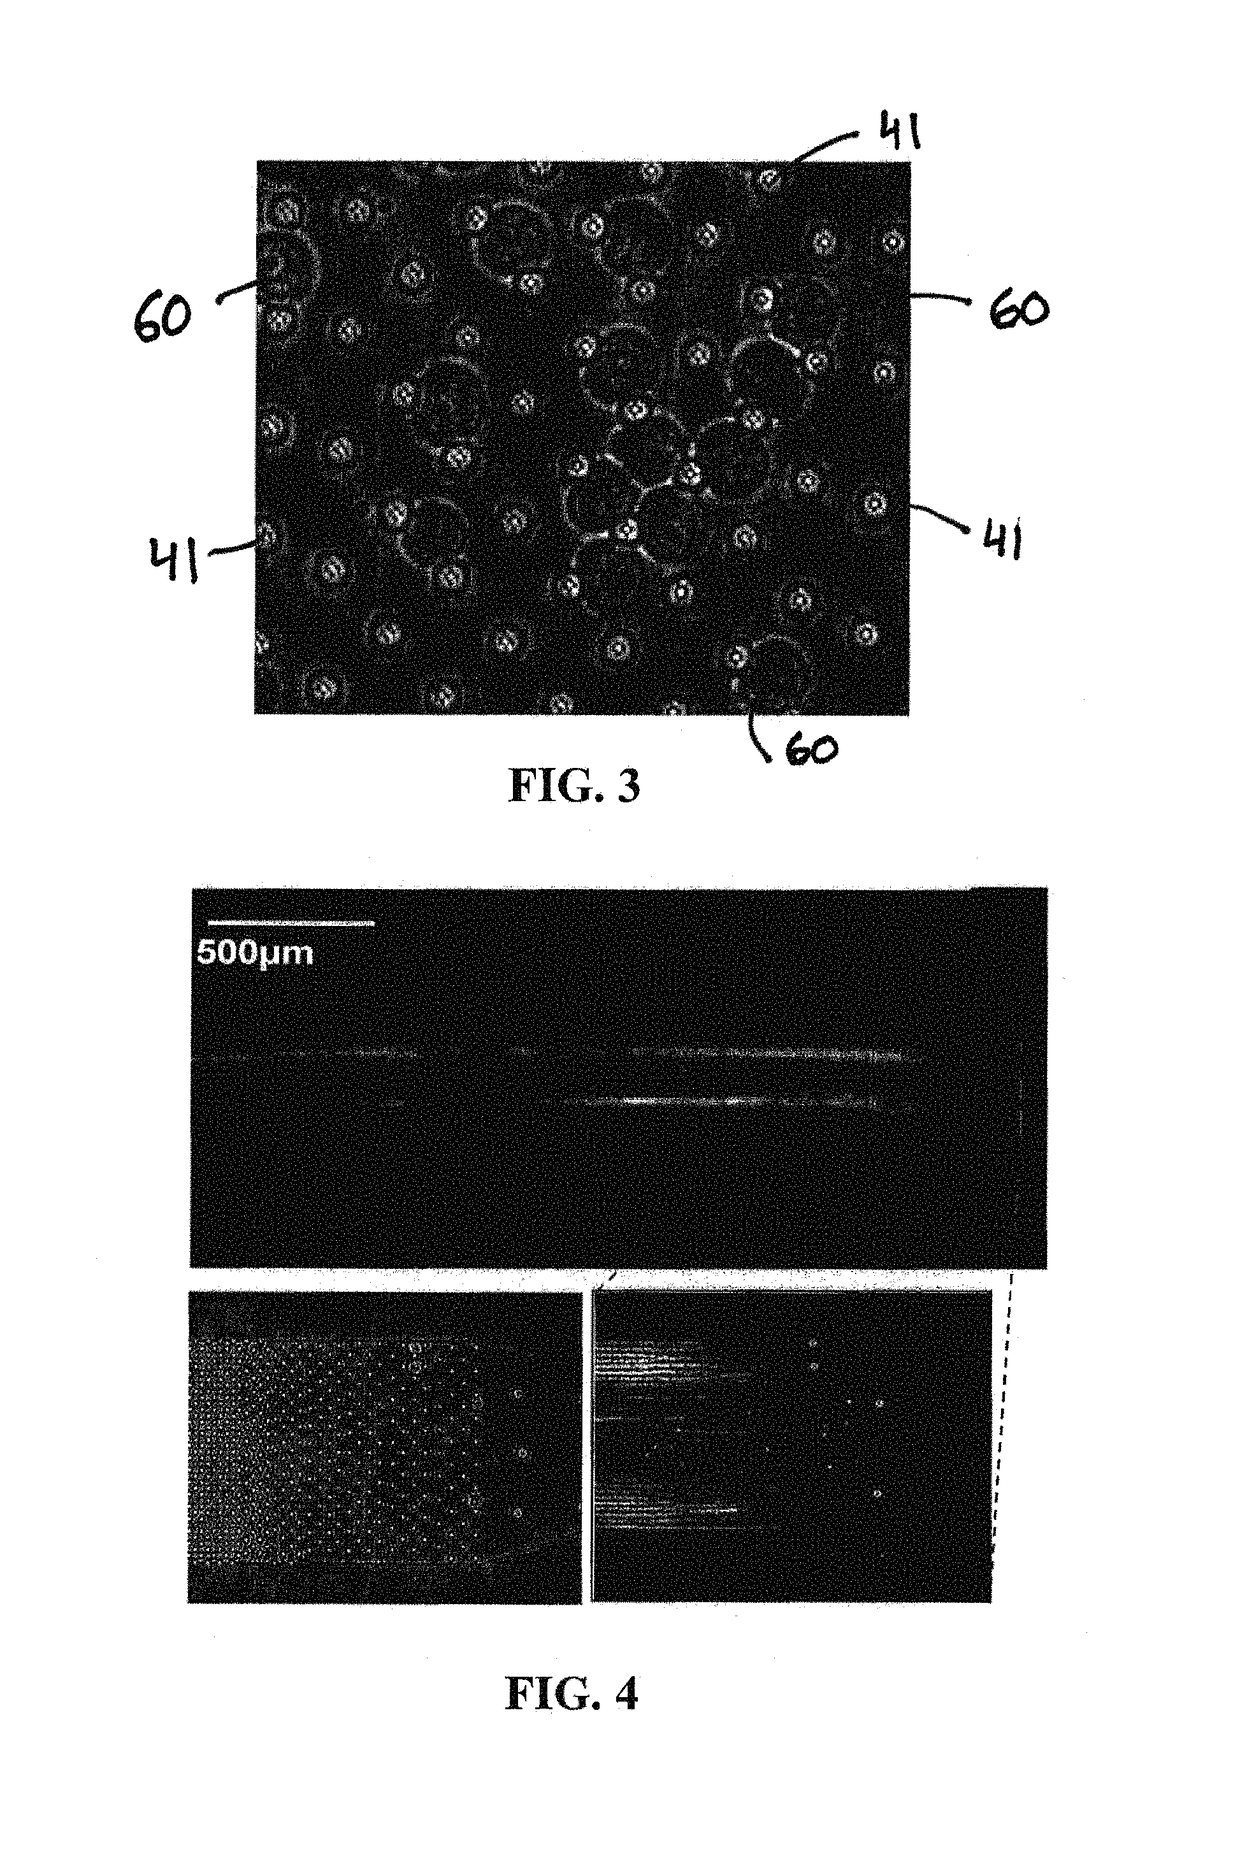 Microfluidic device for extracting, isolating, and analyzing DNA from cells